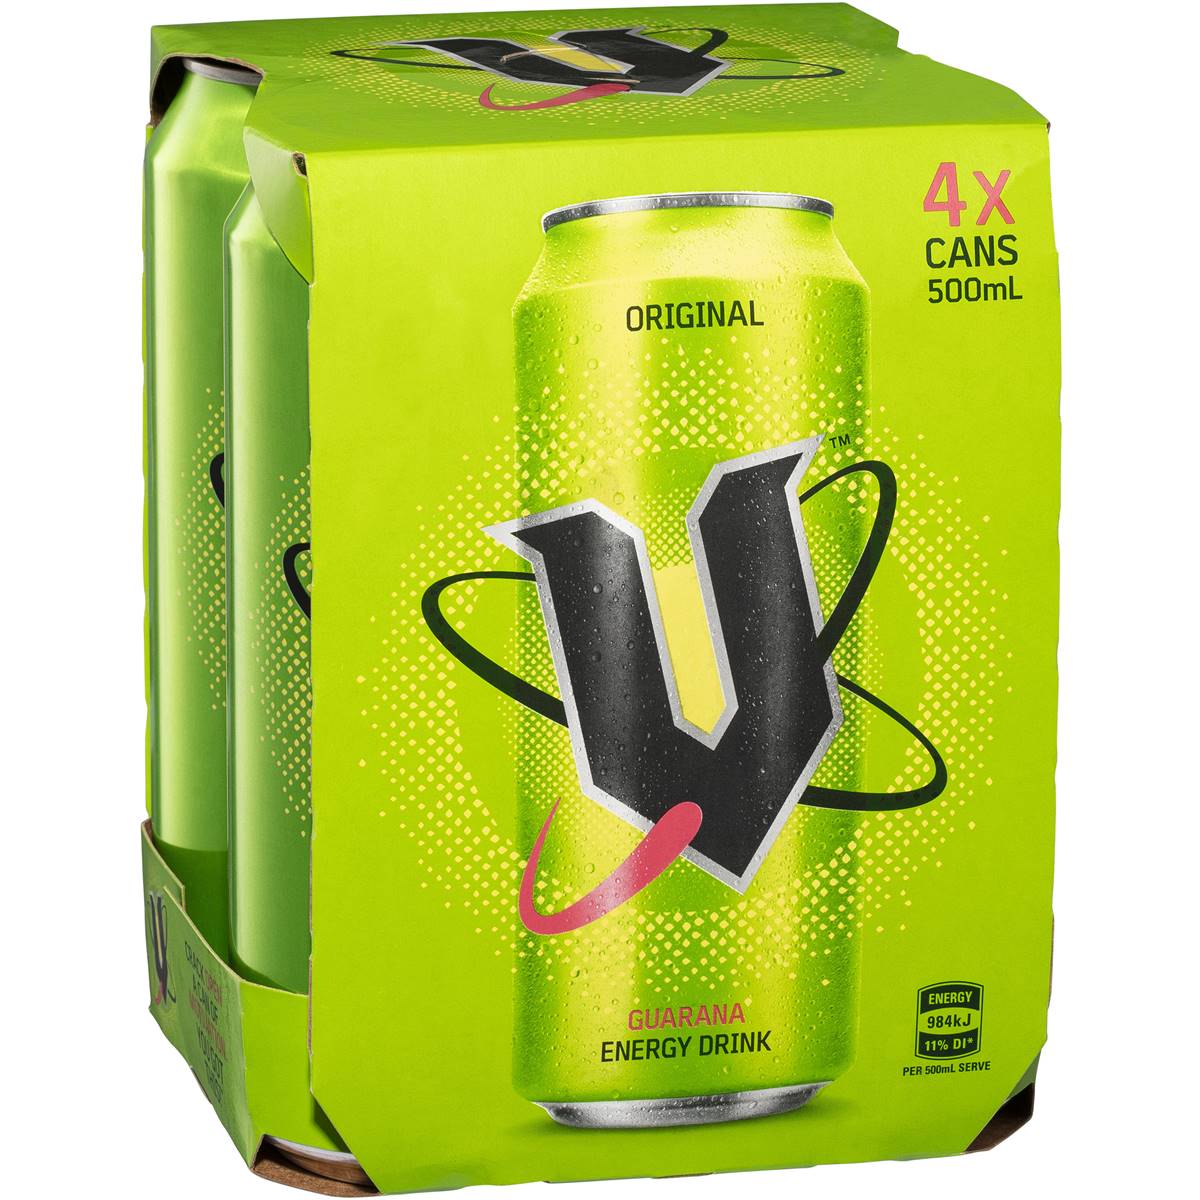 Calories in V Energy Drink